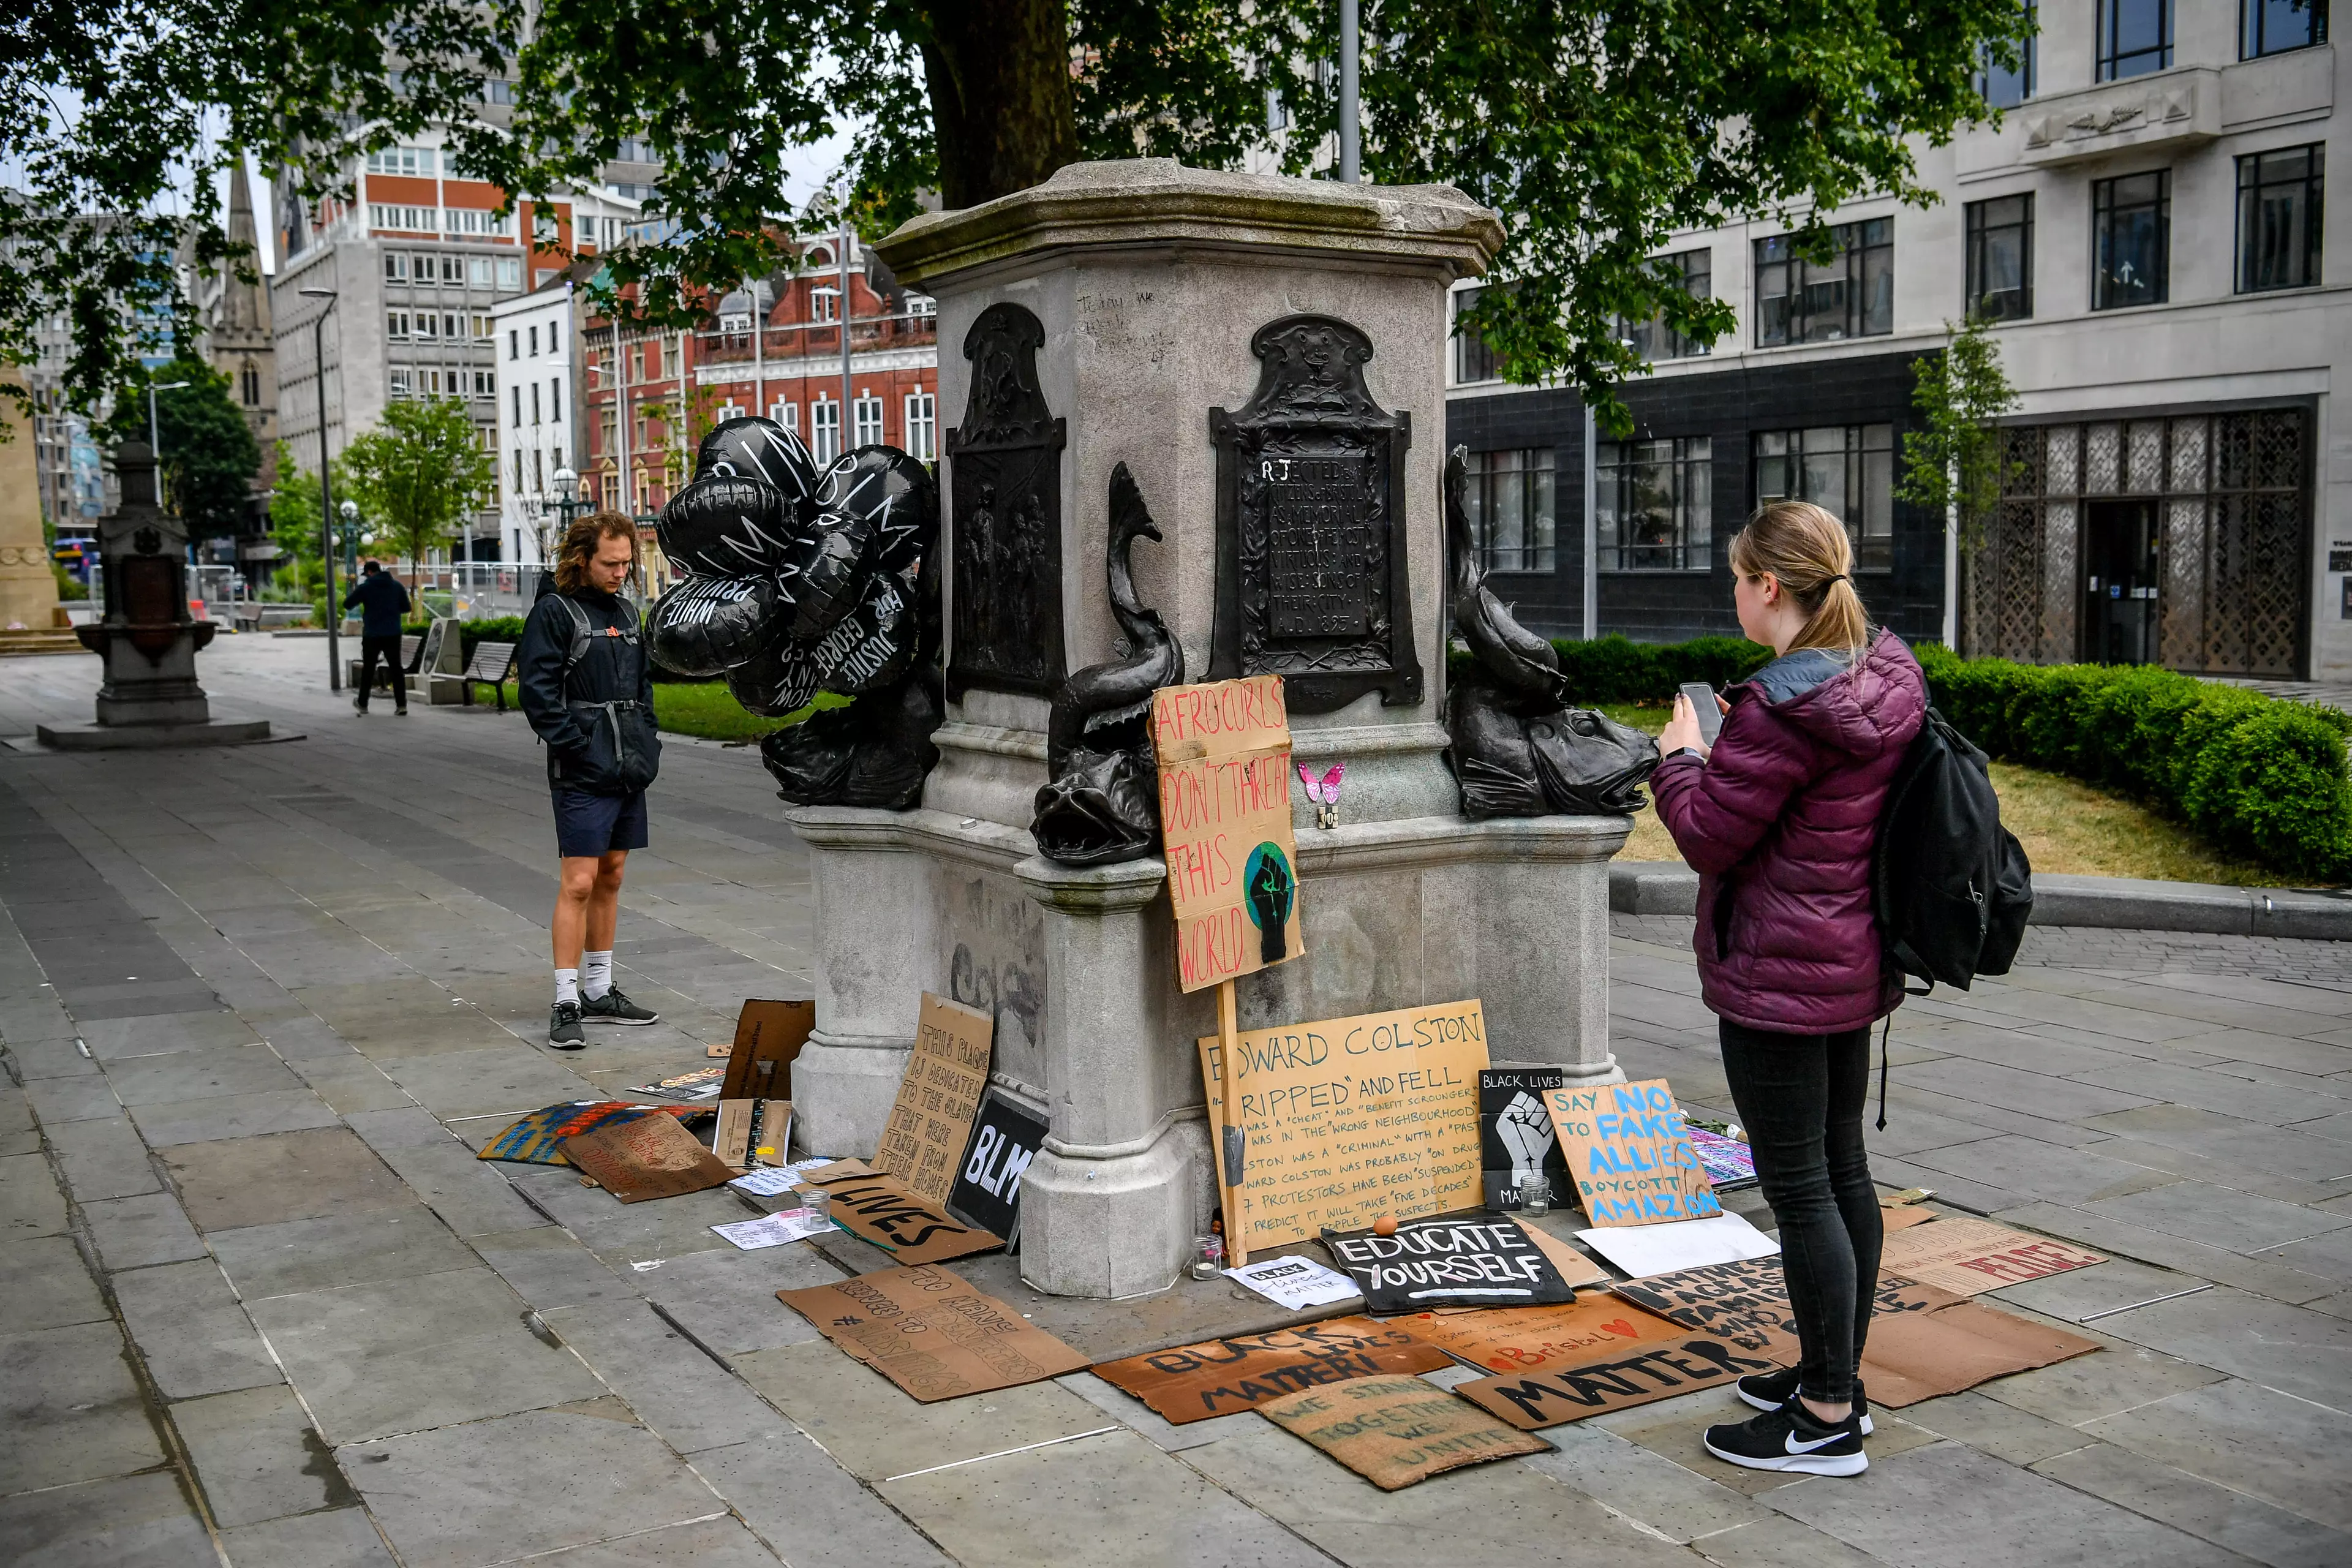 The empty plinth where the Edward Colston statue once stood is now covered in Black Lives Matter placards.